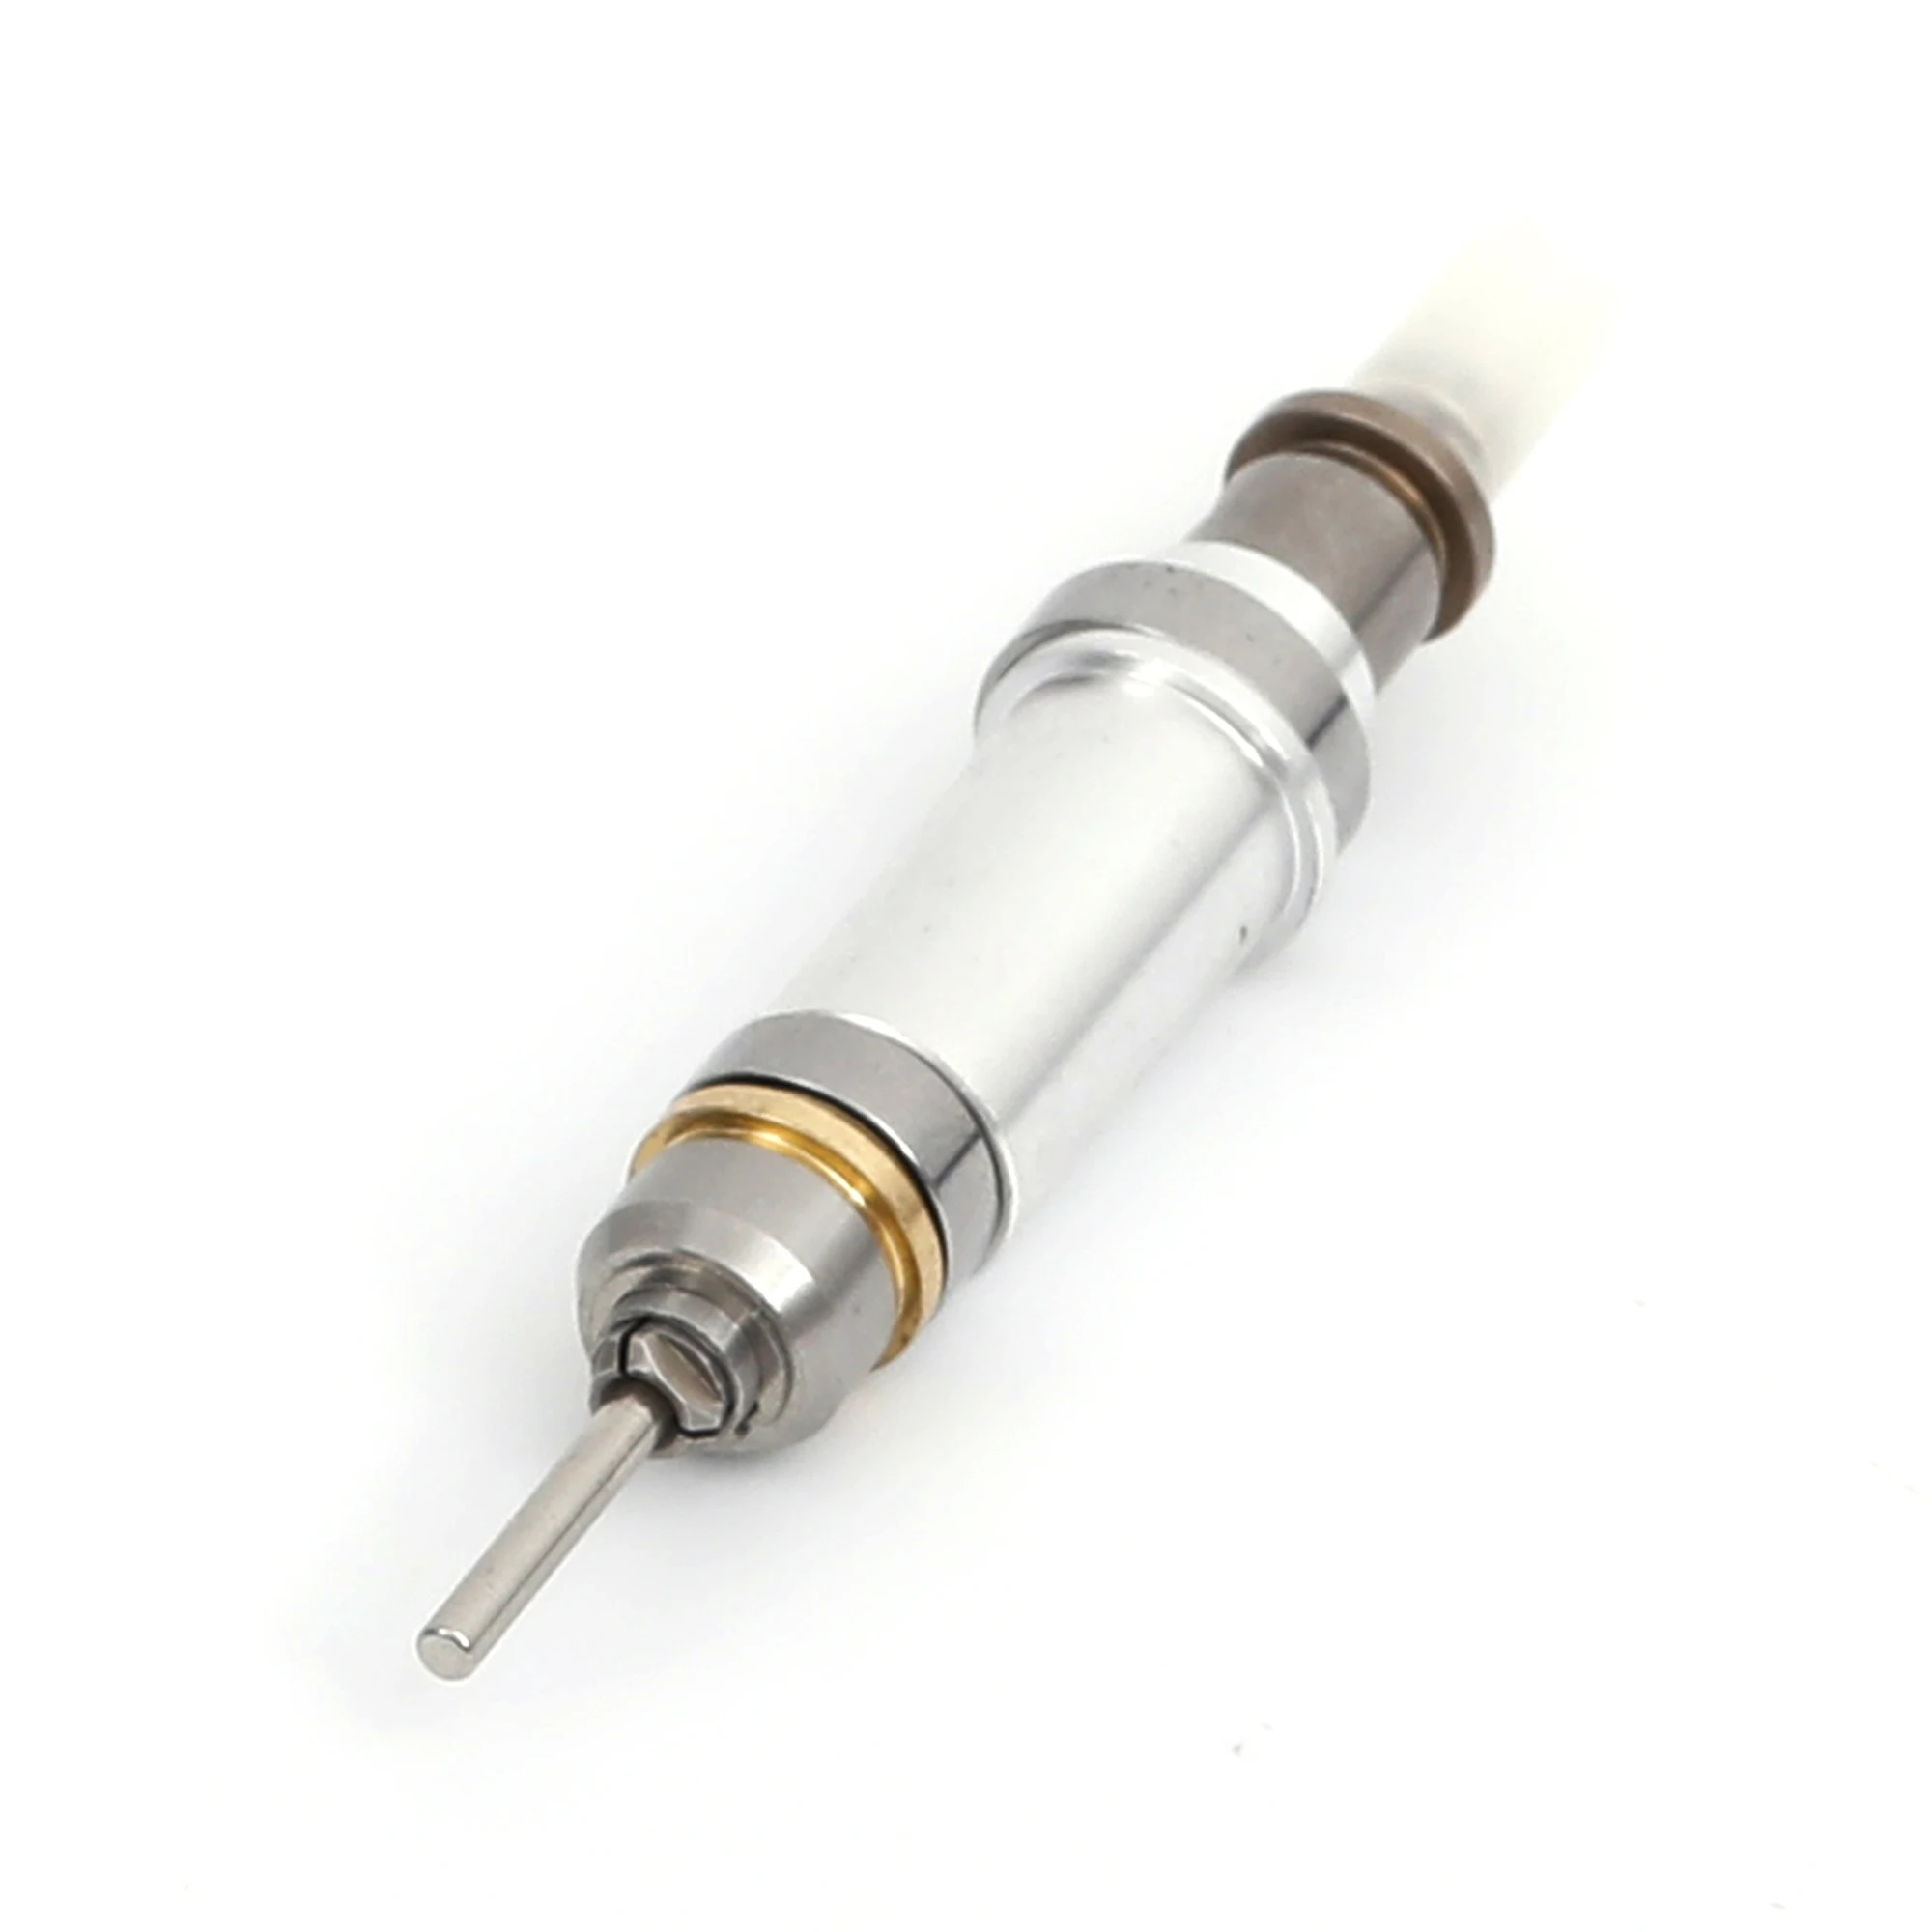 

Strong Handpiece Spindle Dental Lab Micromotor Handpiece parts For STRONG DRILL 50000rpm Q9 brushless handpiece